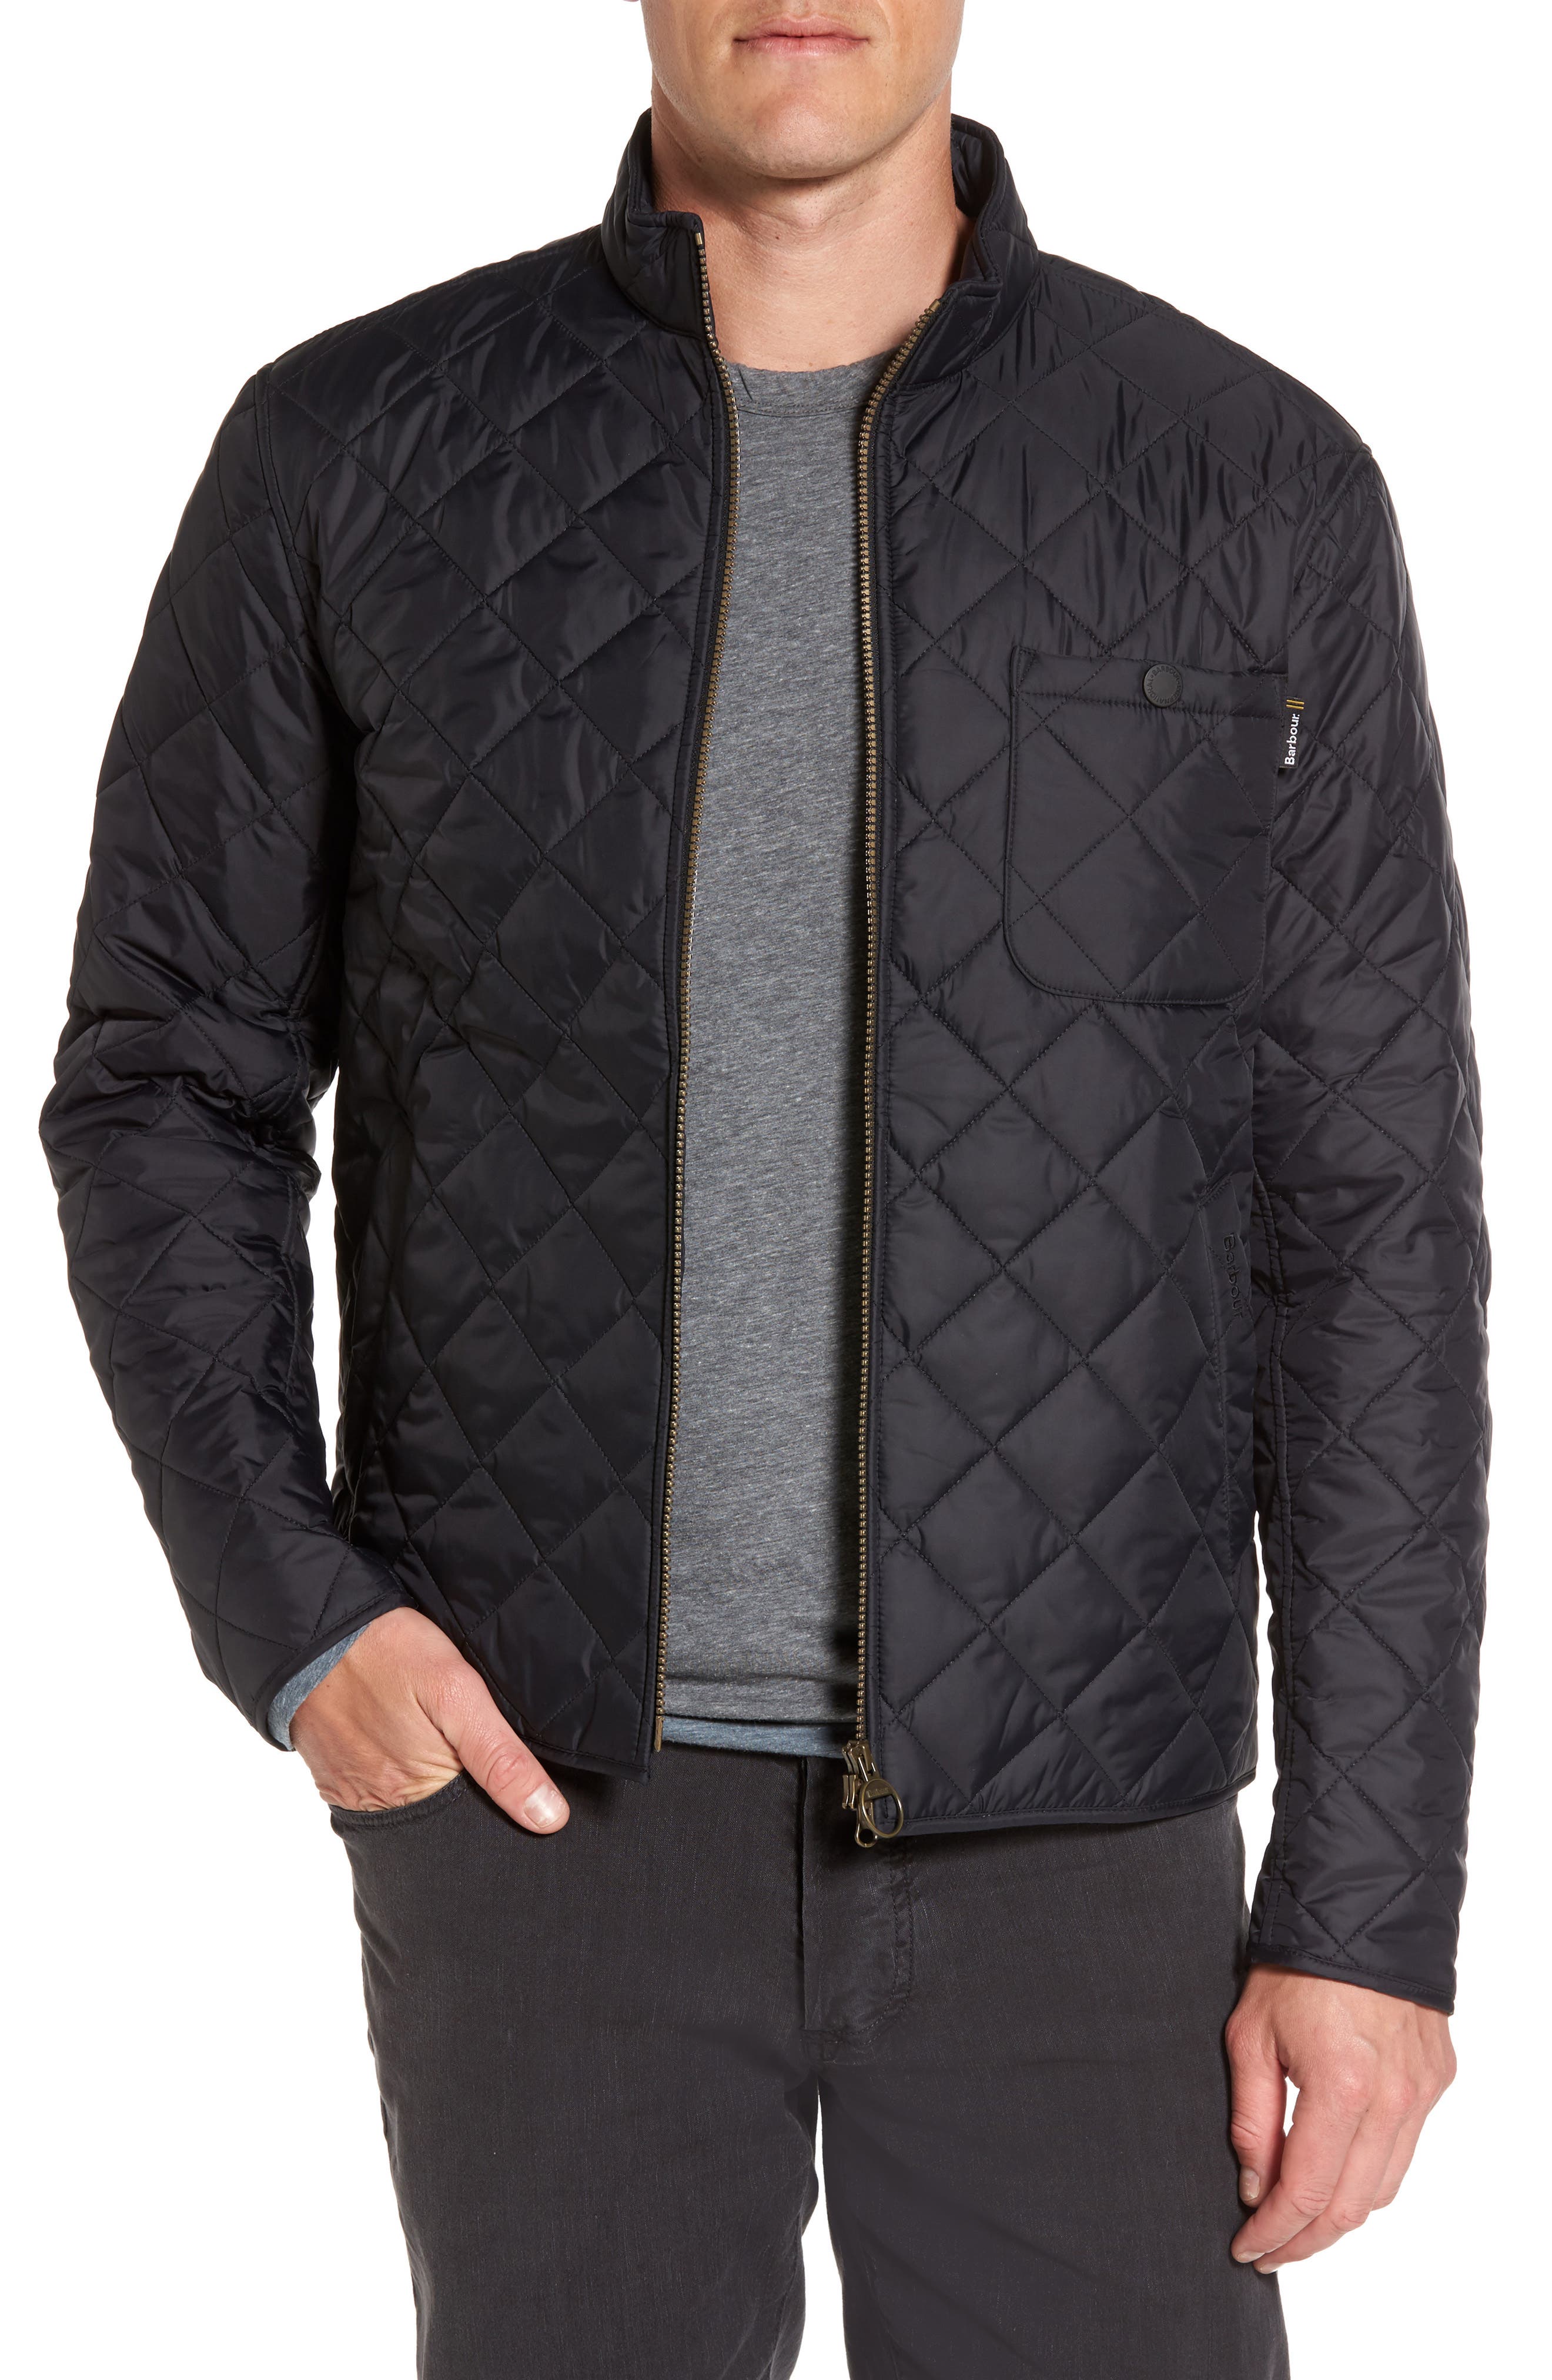 Barbour 'Axle' Slim Fit Diamond Quilted 